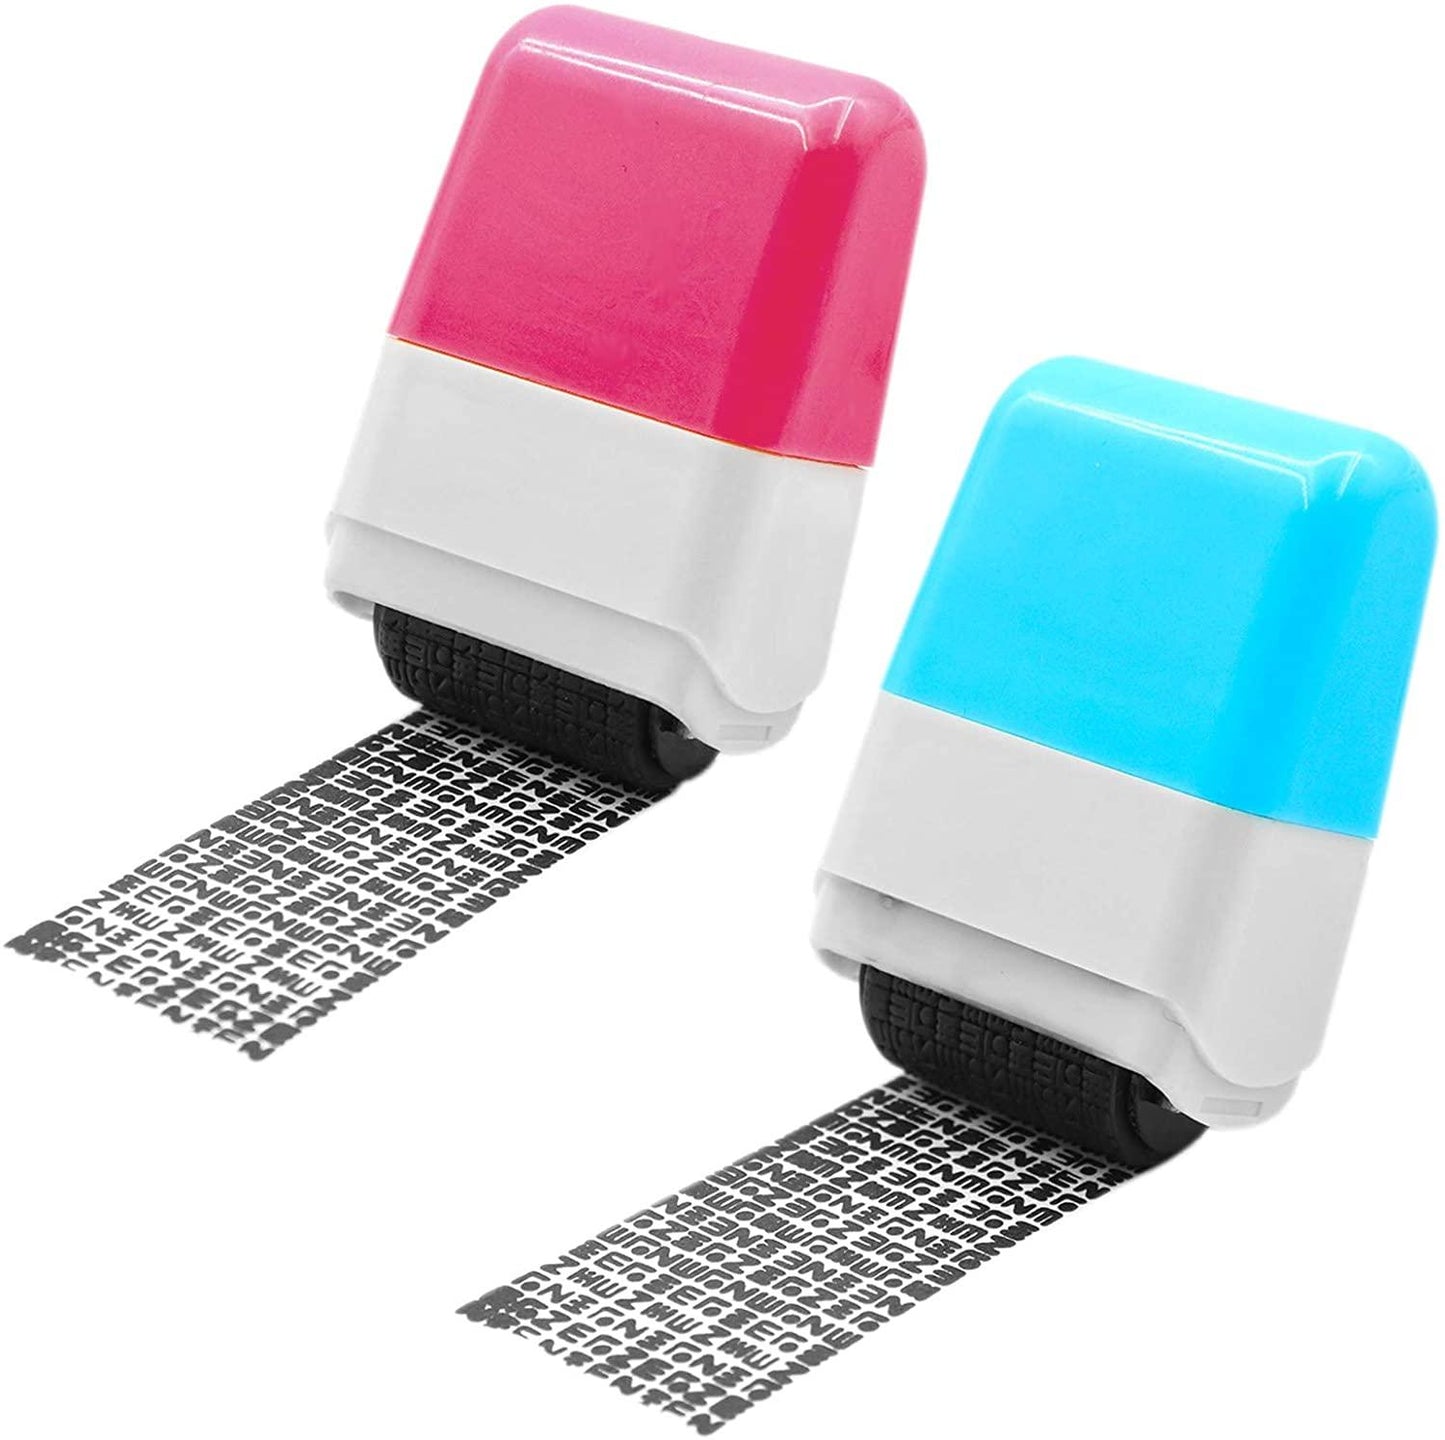 Identity Theft Protection Stamp - If you say i do